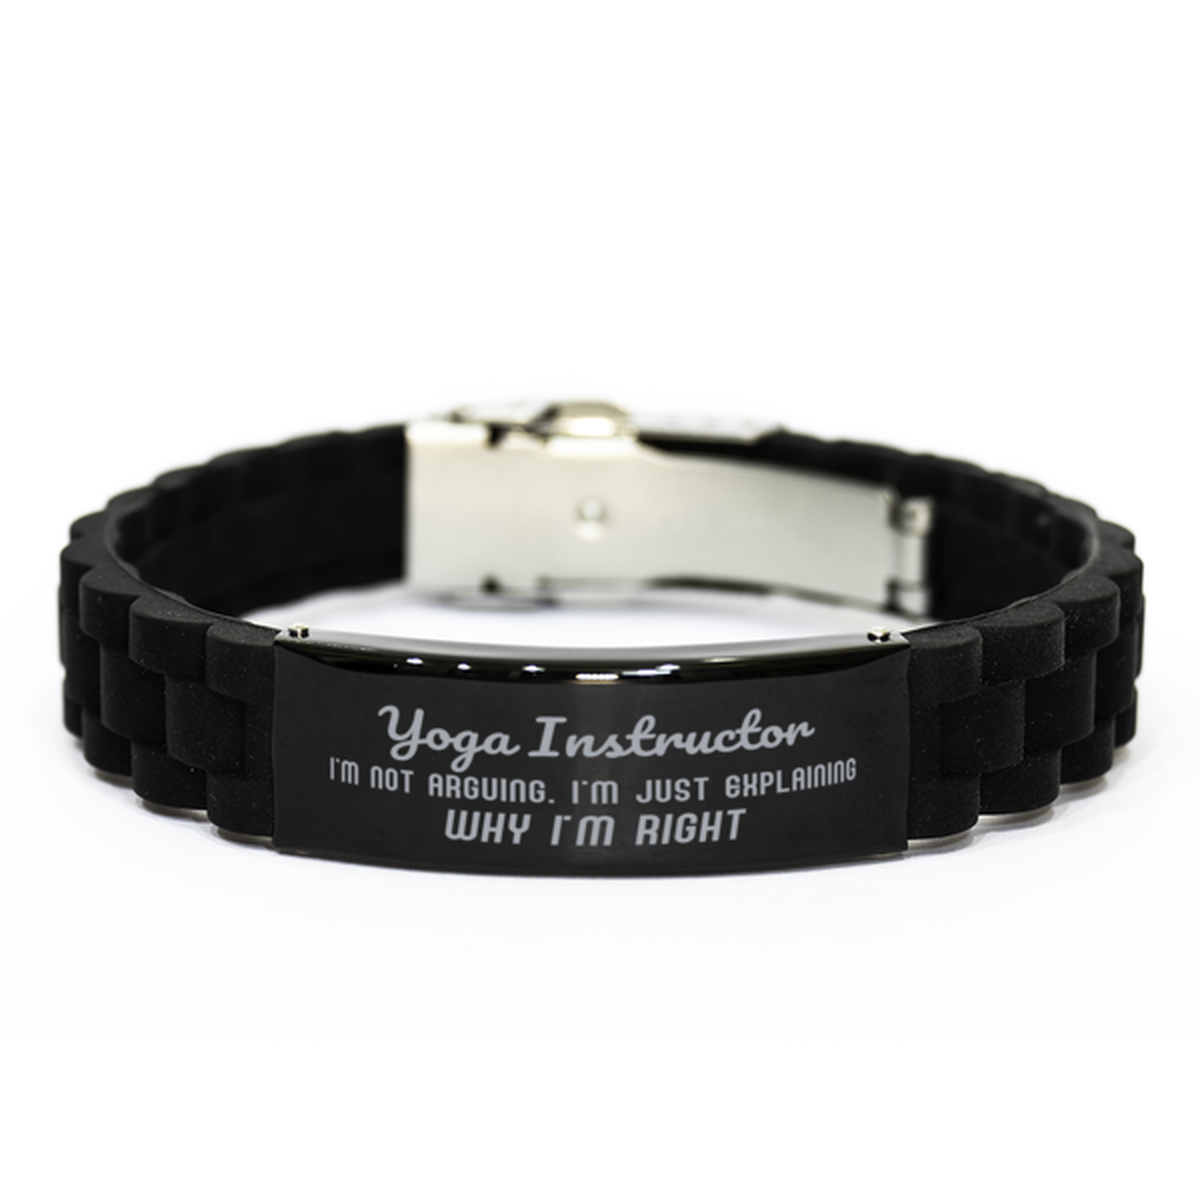 Yoga Instructor I'm not Arguing. I'm Just Explaining Why I'm RIGHT Black Glidelock Clasp Bracelet, Funny Saying Quote Yoga Instructor Gifts For Yoga Instructor Graduation Birthday Christmas Gifts for Men Women Coworker